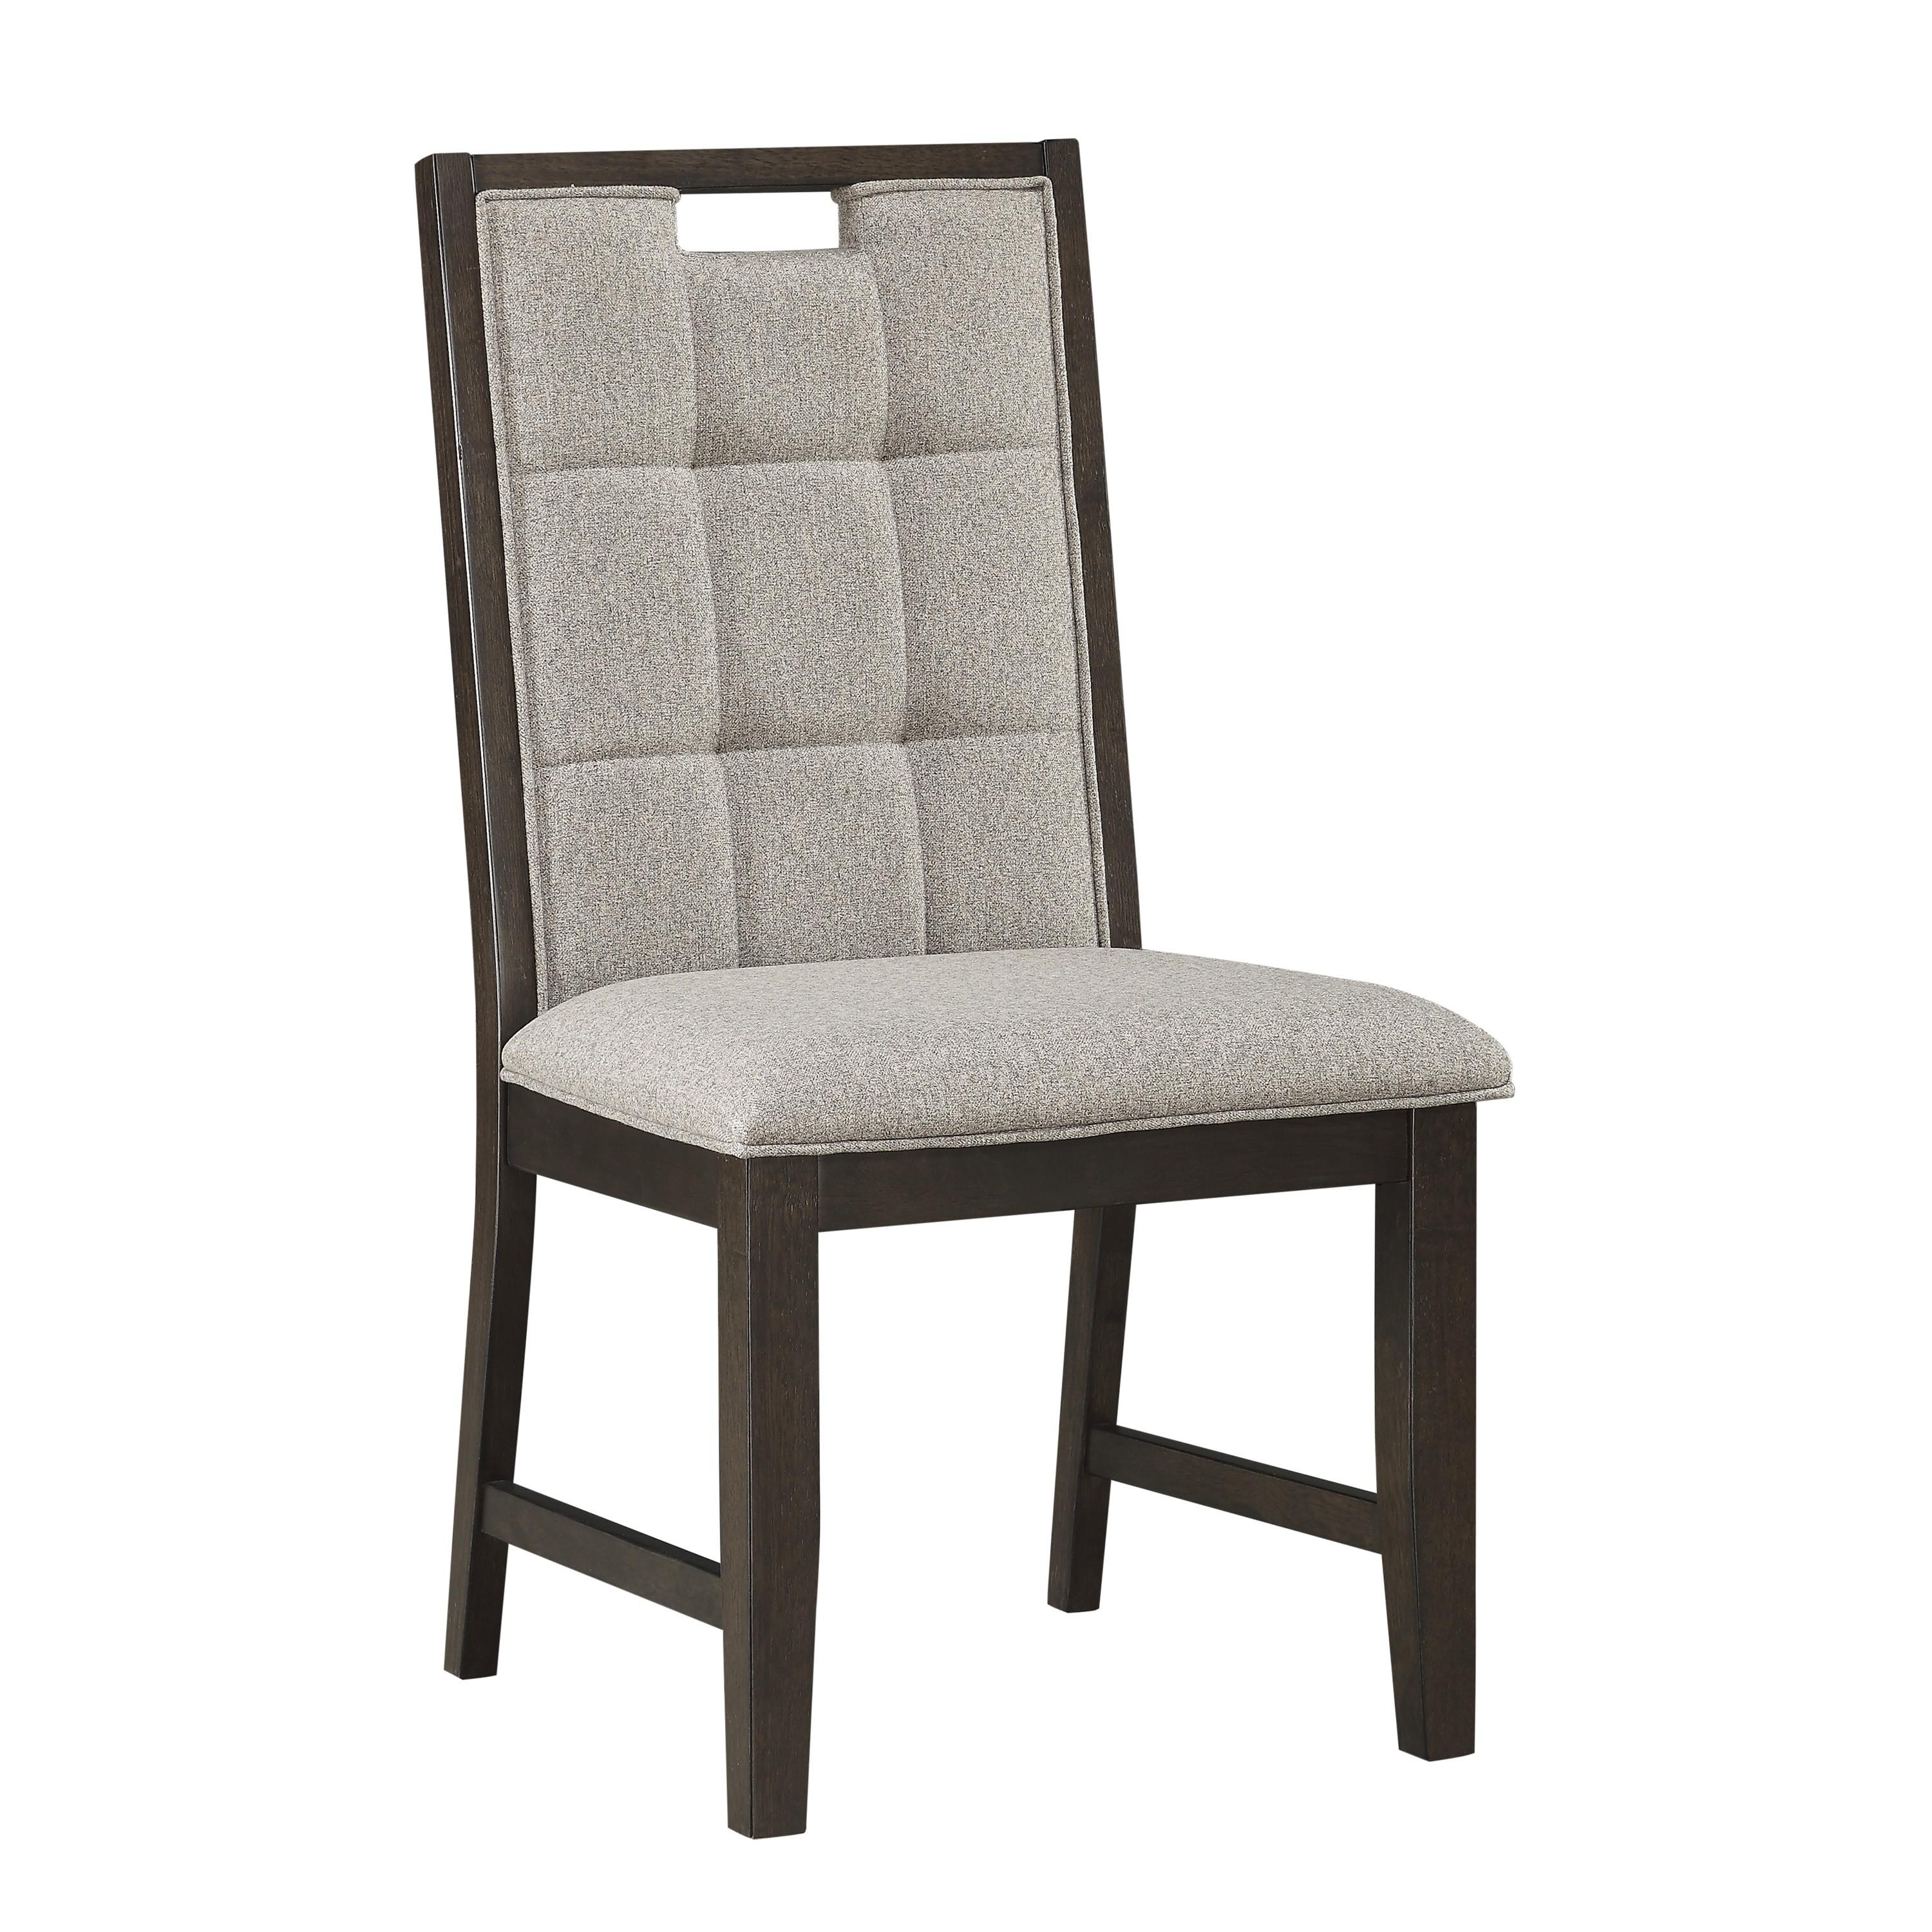 Transitional Side Chair Set 5654S Rathdrum 5654S in Dark Oak Polyester